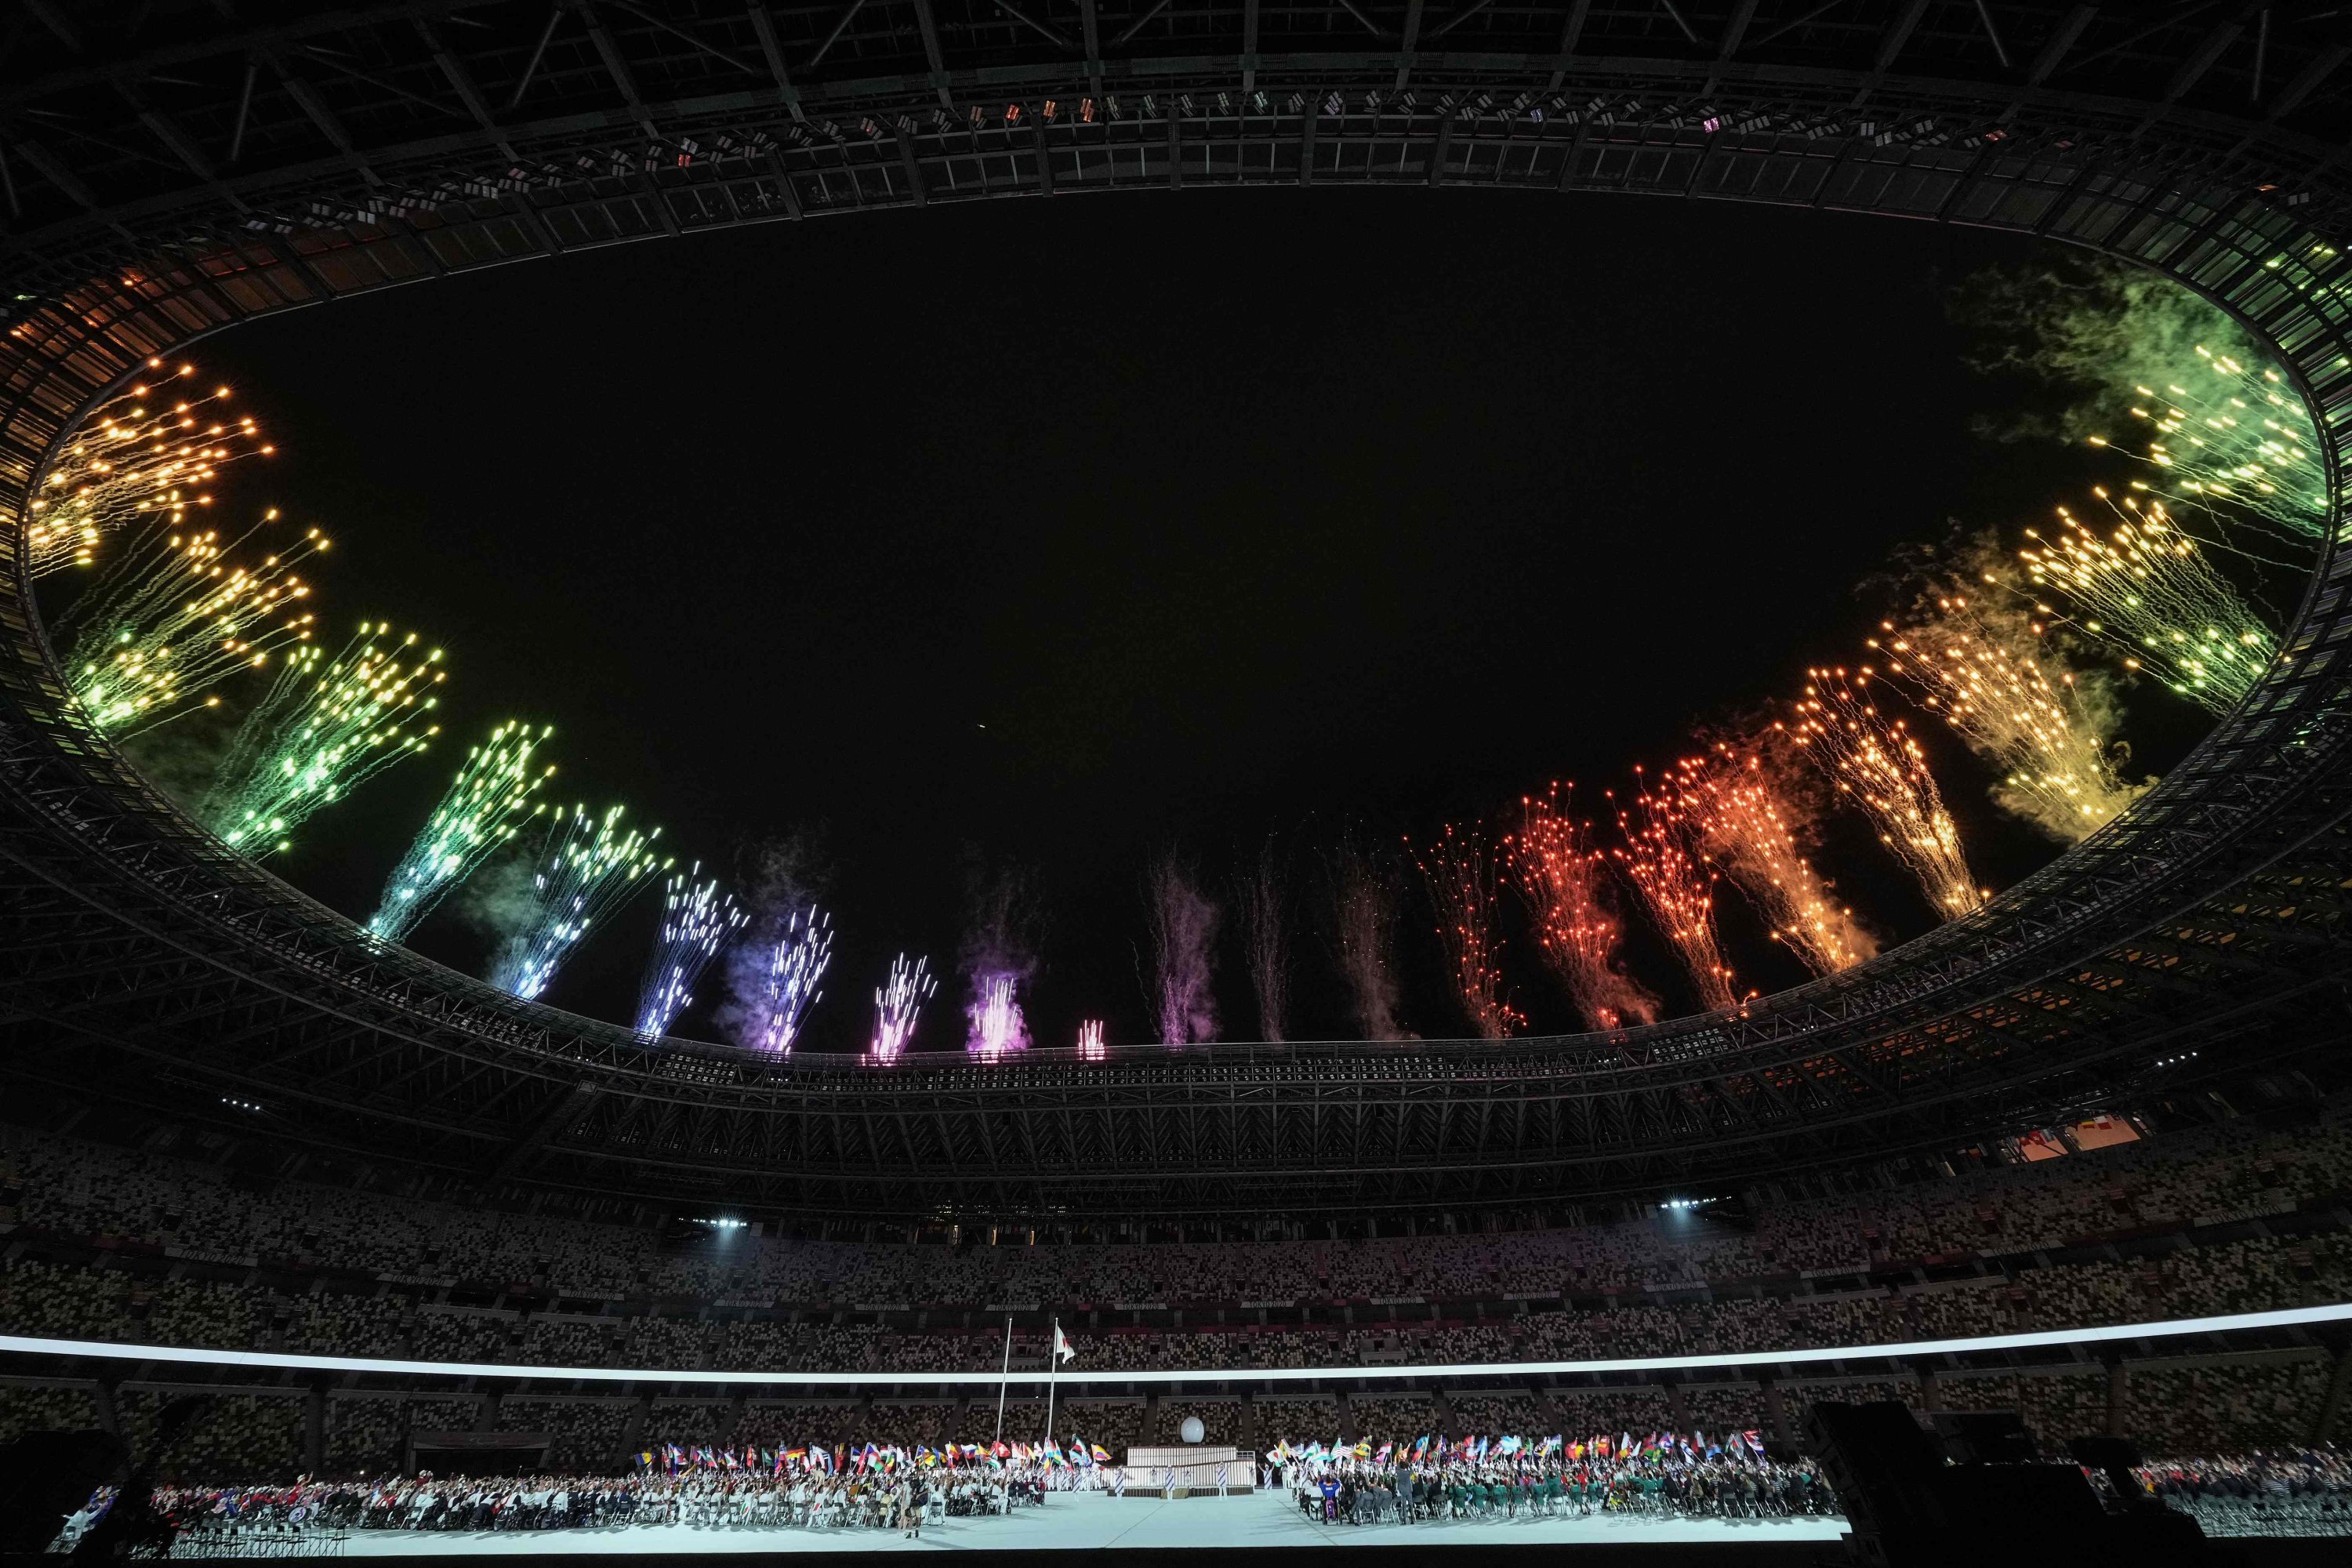 Fireworks light up the sky during the Tokyo 2020 Paralympic Games opening ceremony at the Olympic Stadium in Tokyo, Japan, Aug. 24, 2021. (AFP Photo)